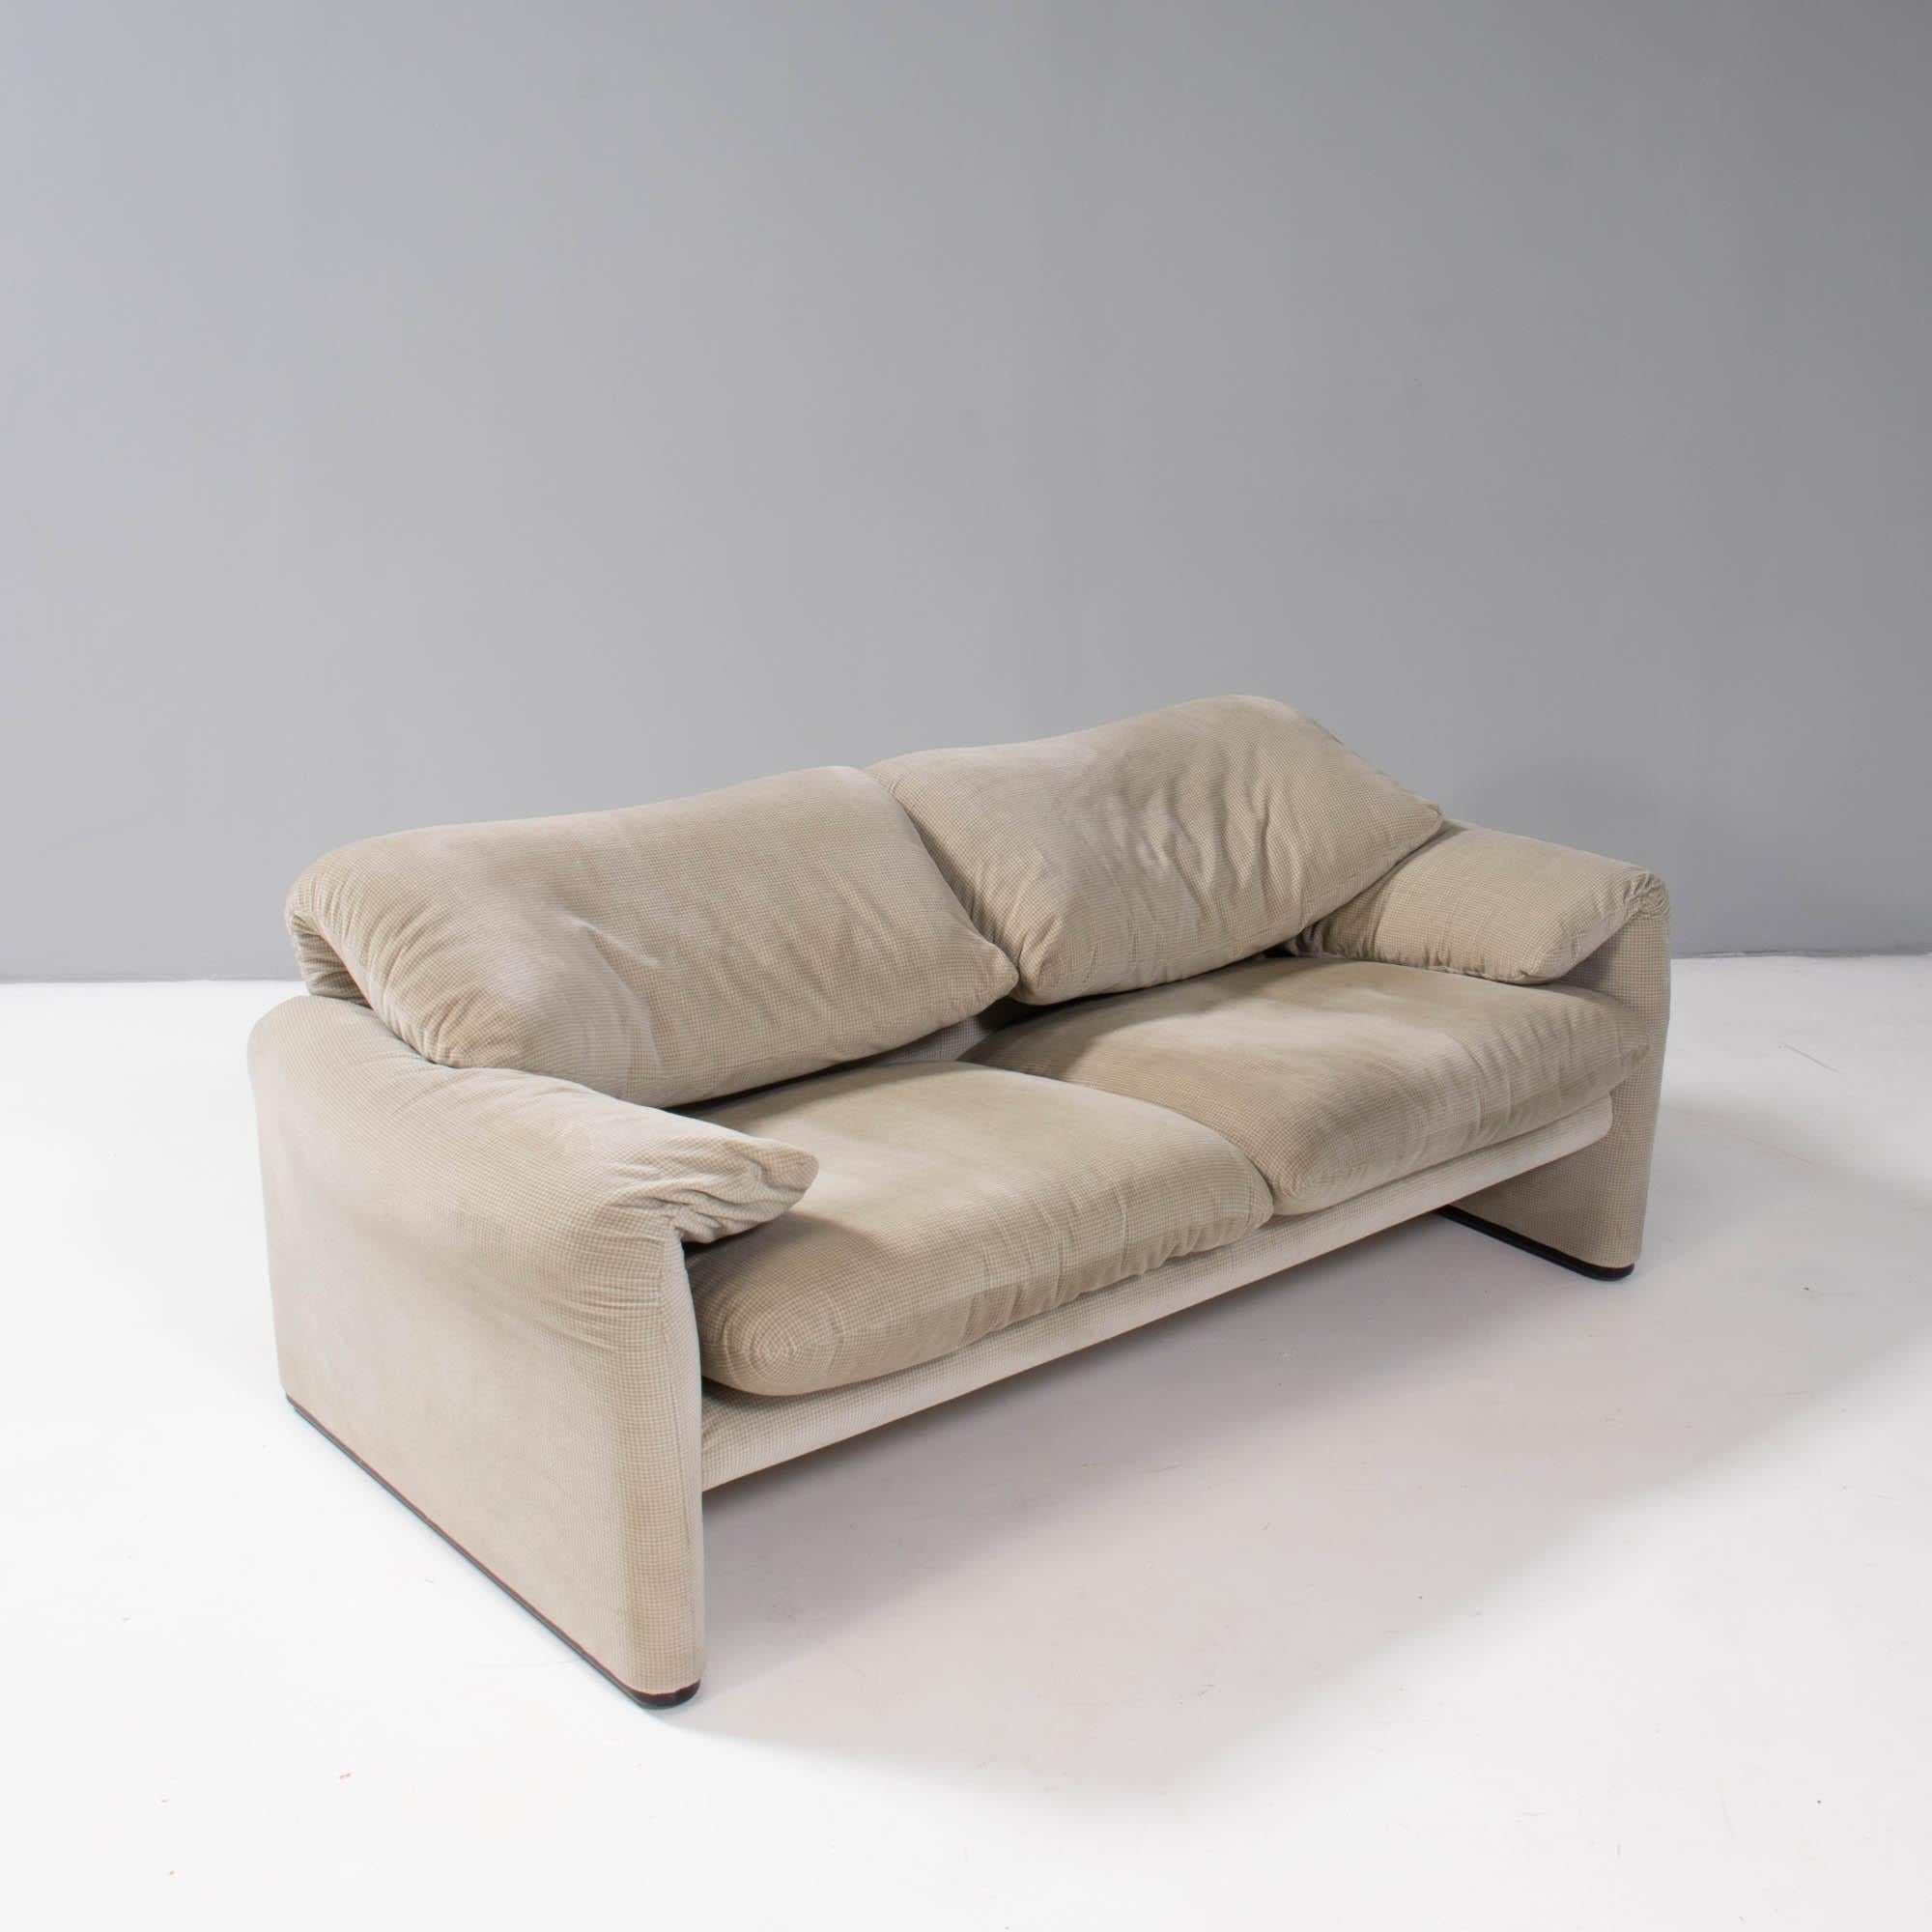 Originally designed by Vico Magistretti for Cassina in 1973, the Maralunga sofa has become a true design icon.

Upholstered in soft textured beige upholstery the sofa features the signature adjustable headrests and folded armrests, while two